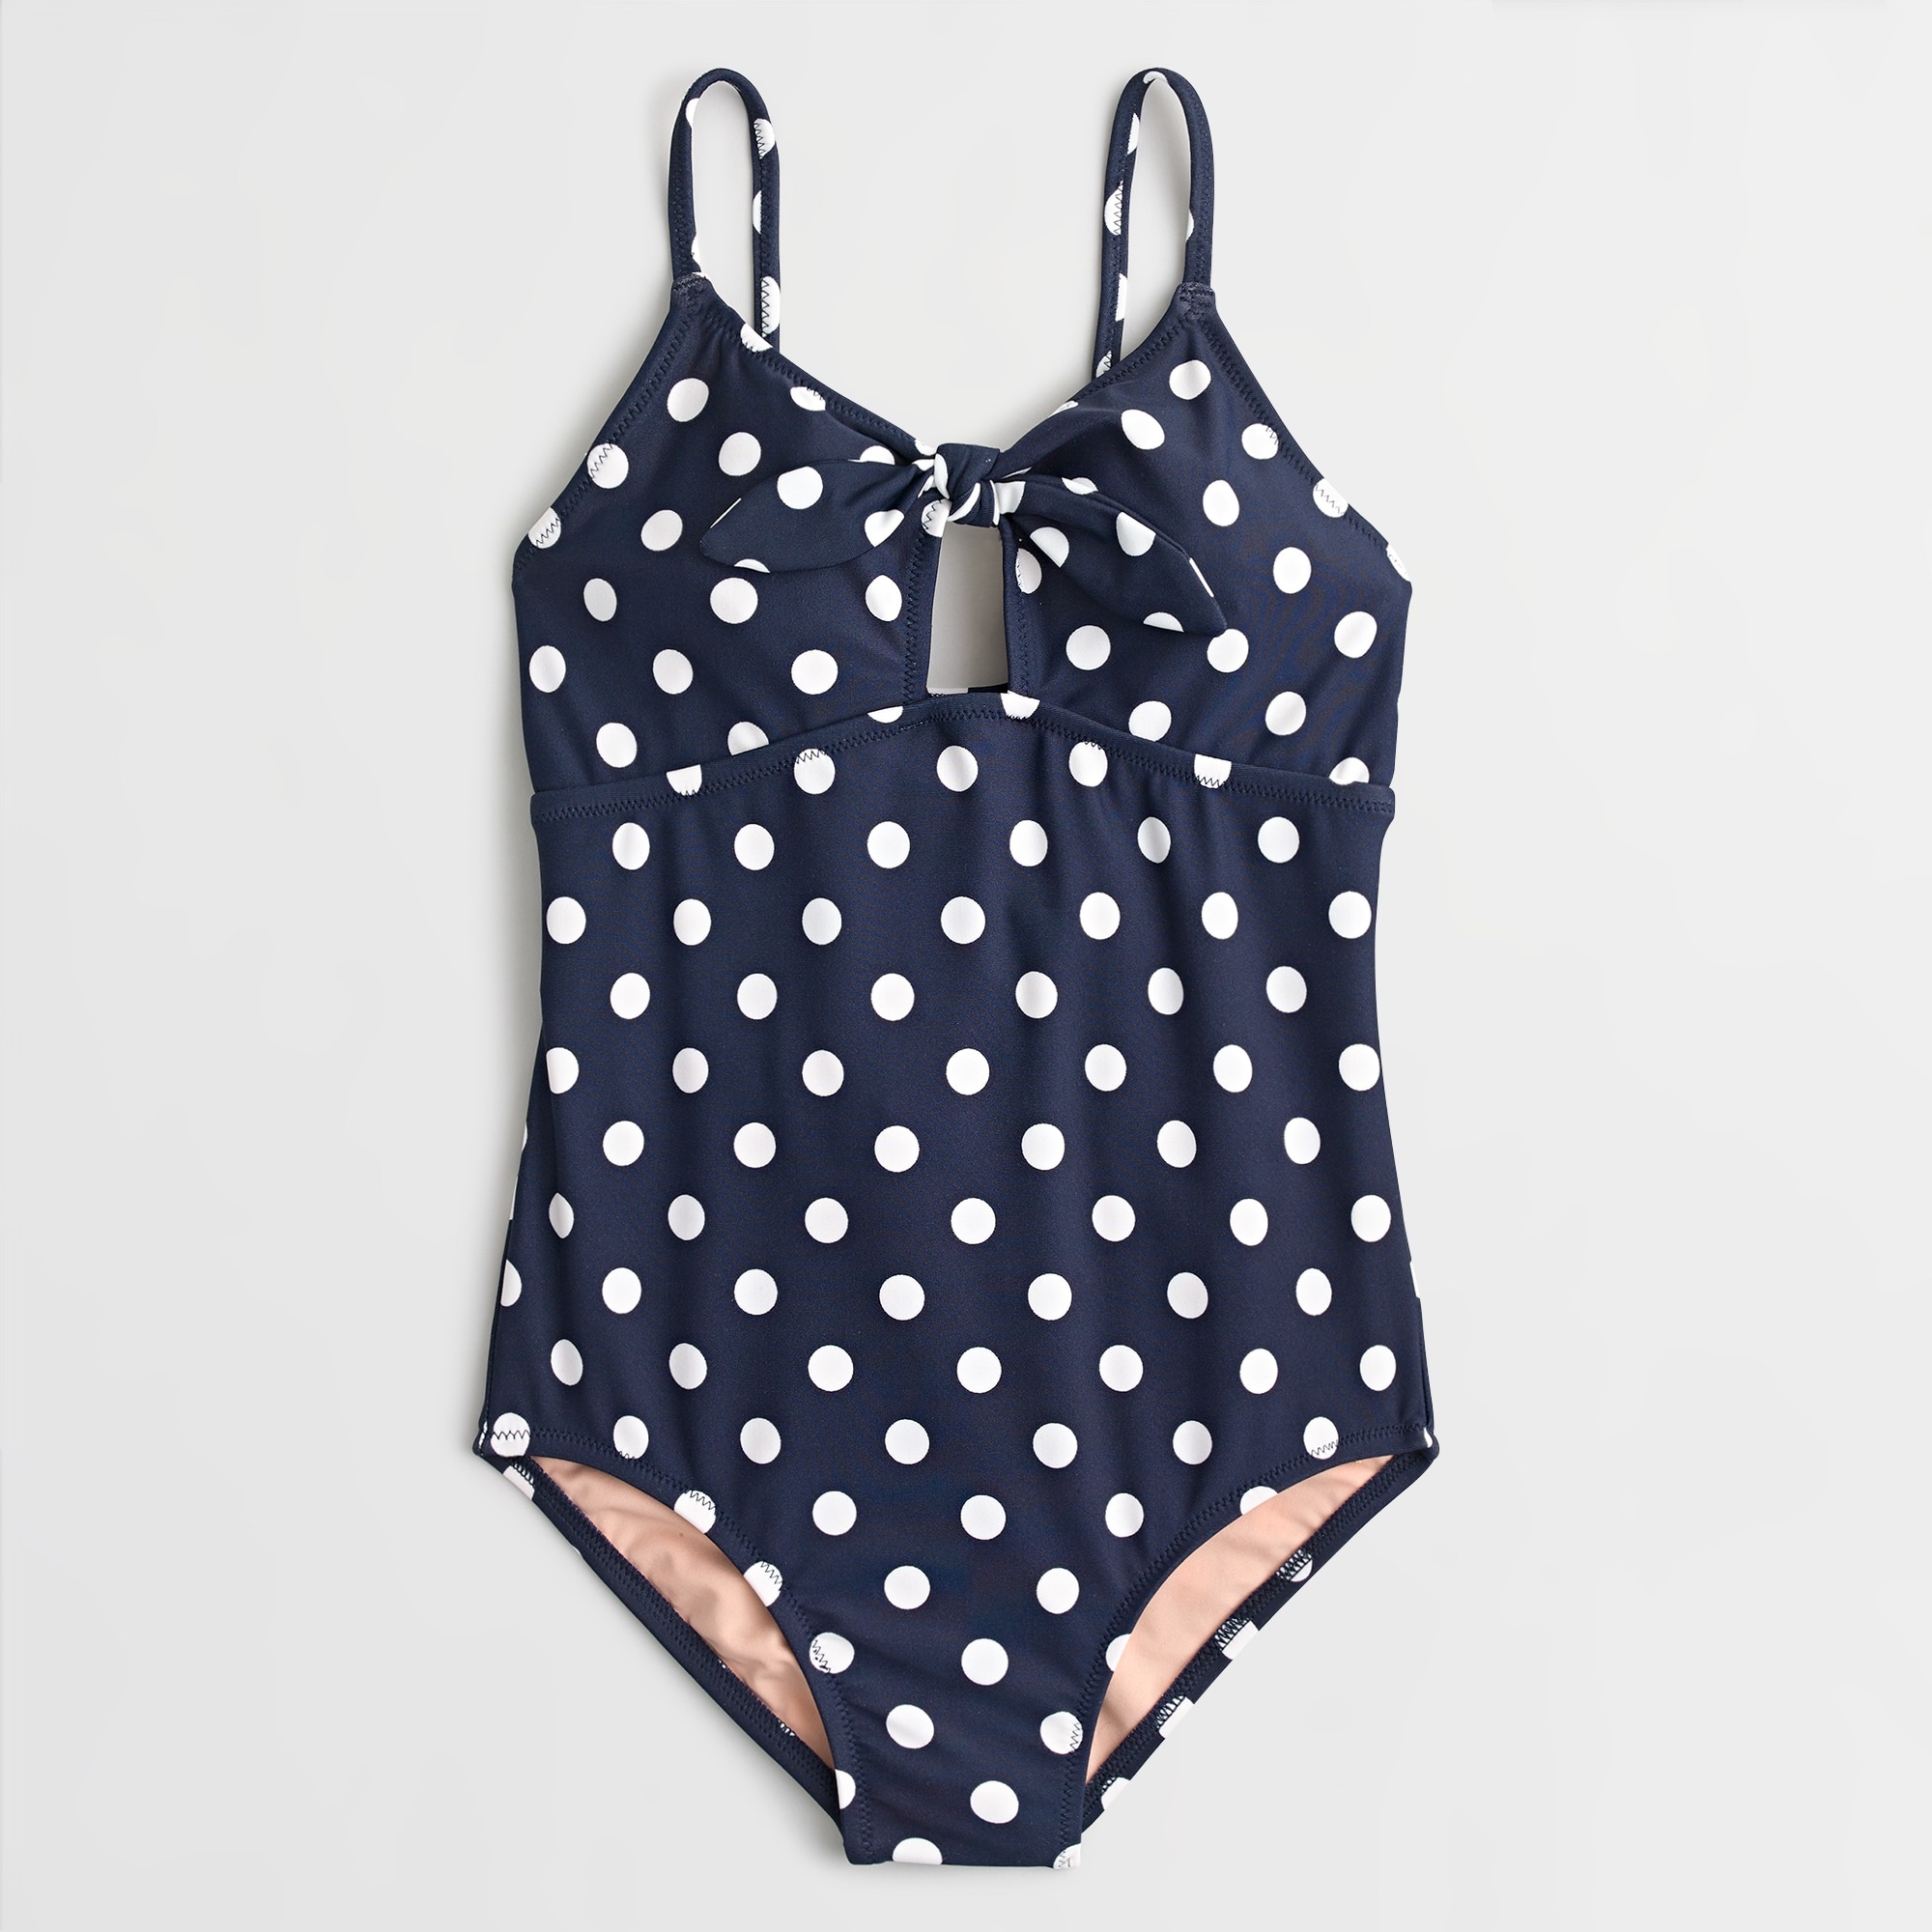 J.Crew: Girls' Tie-front One-piece Bathing Suit In Polka Dot For Girls